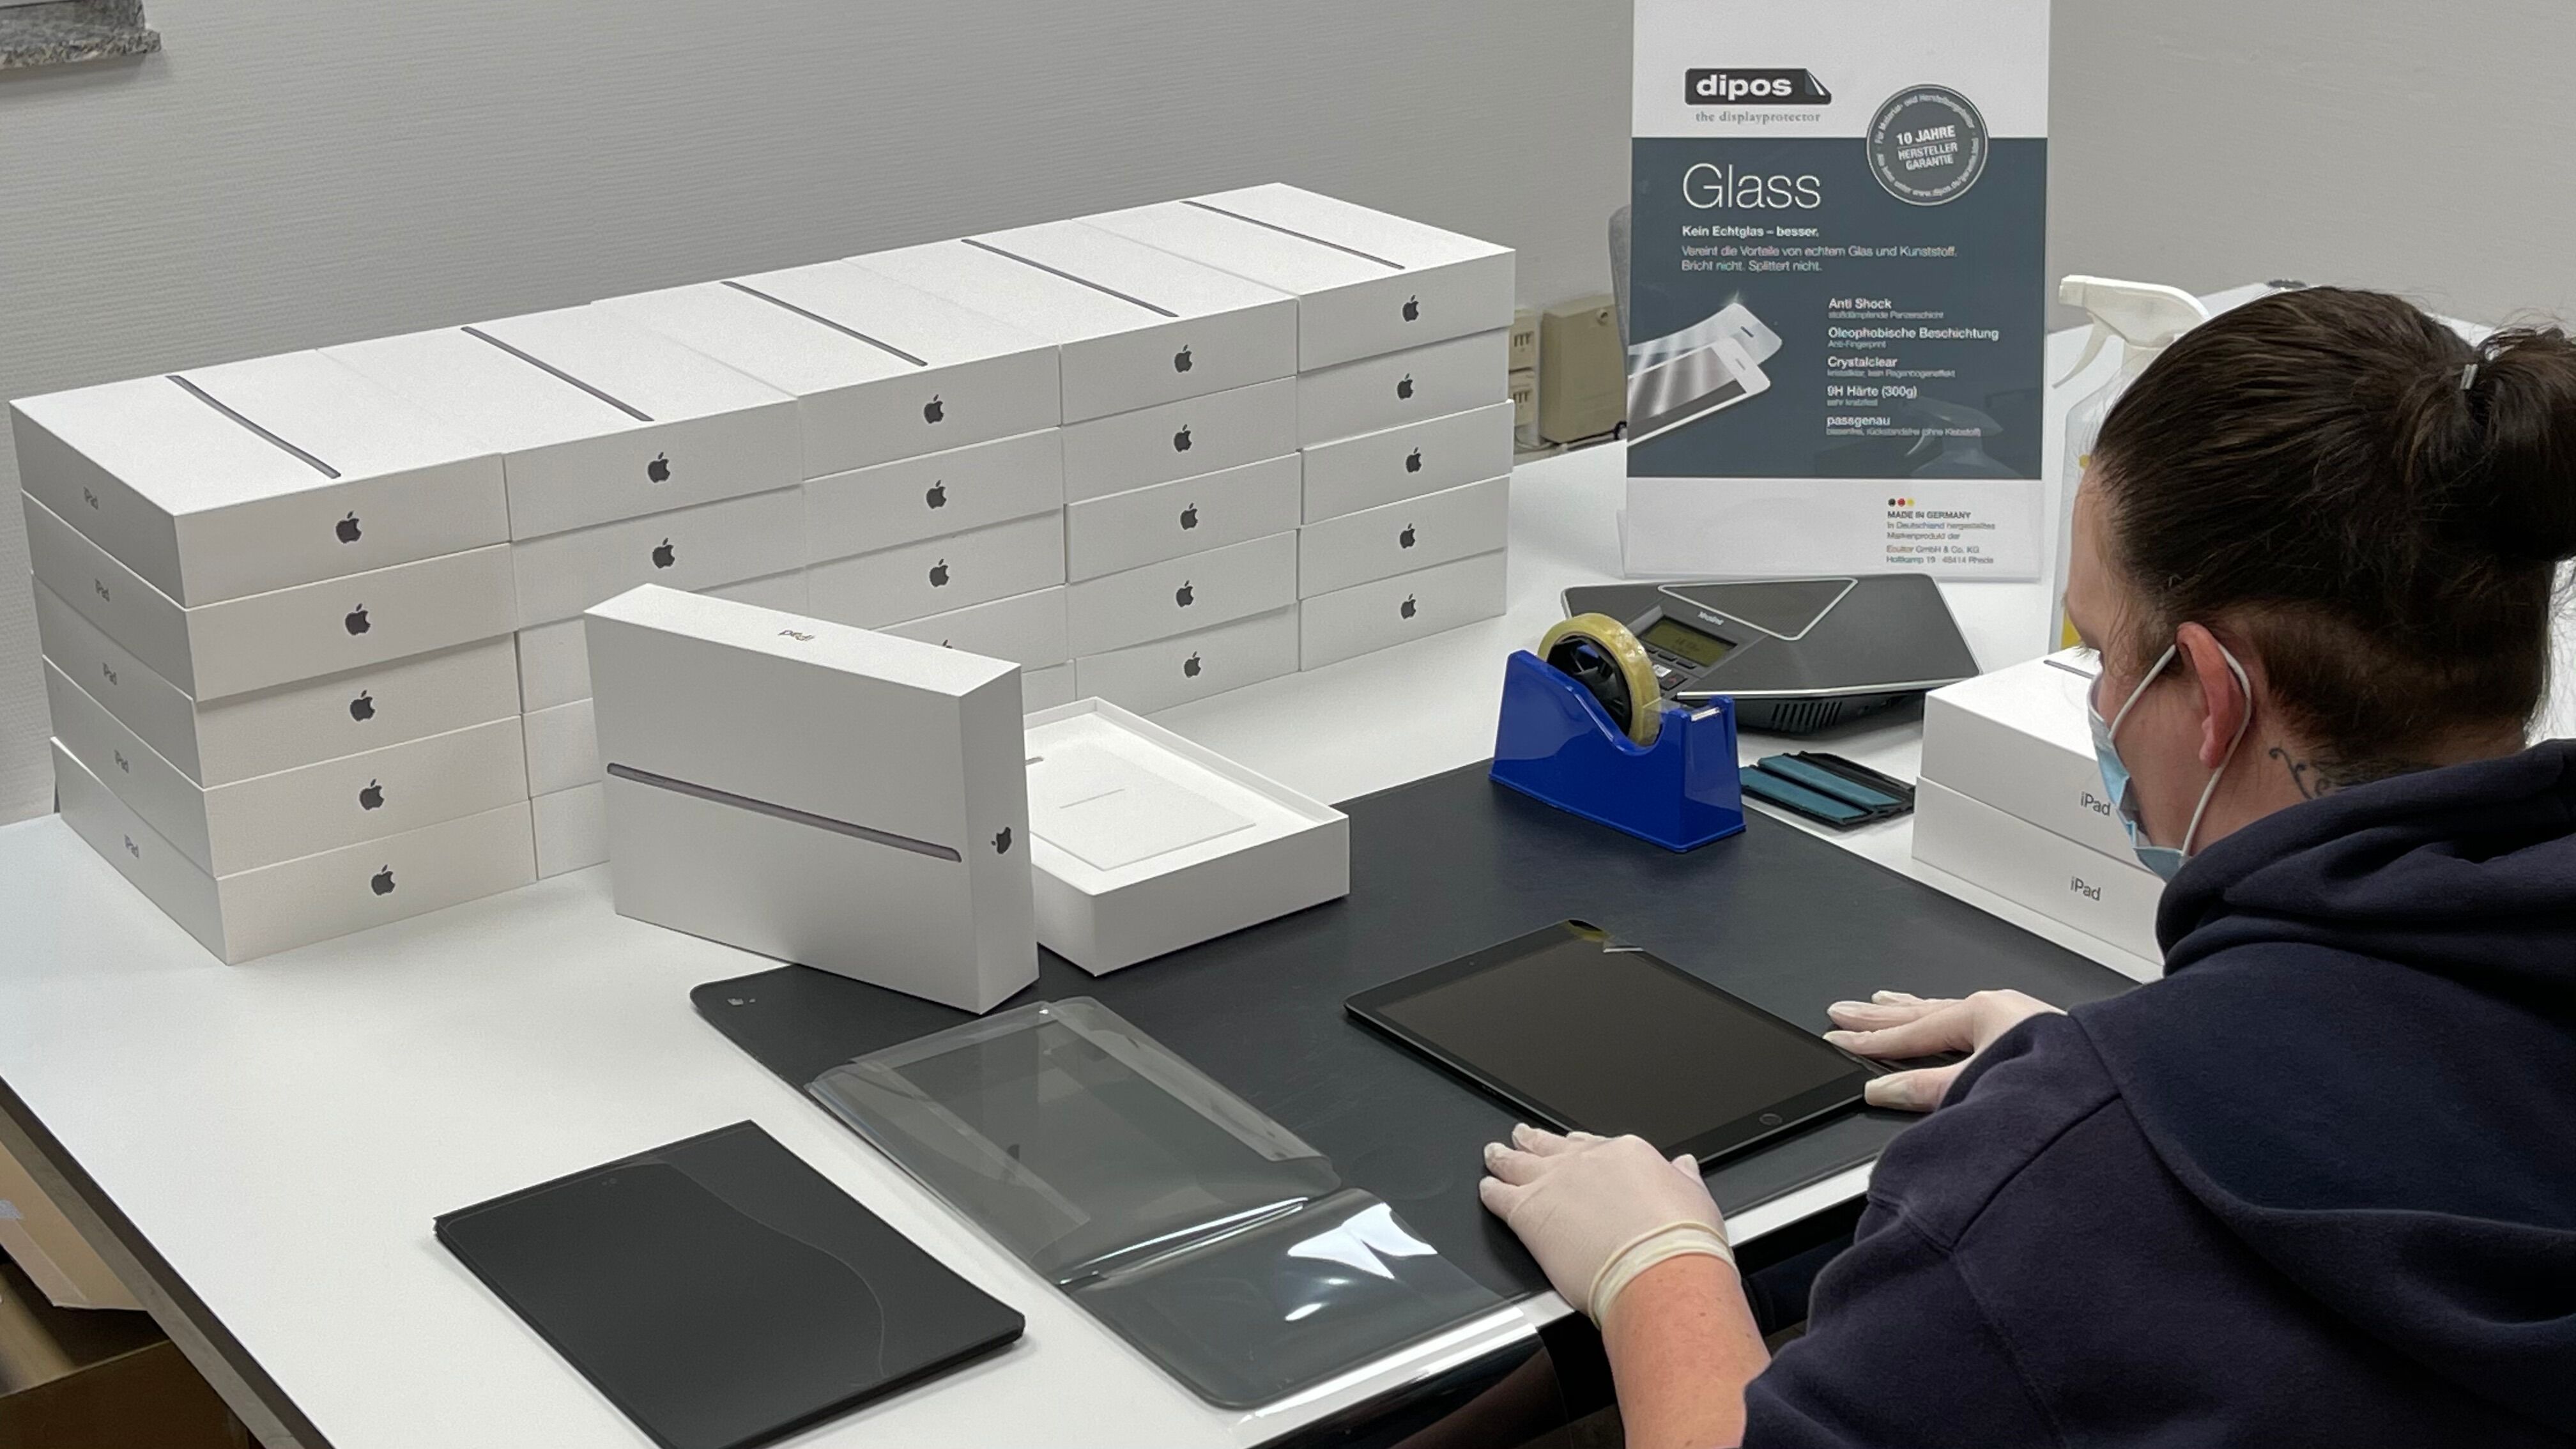 On behalf of a customer, 100 Apple iPads are laminated with the dipos Glass screen protection film.